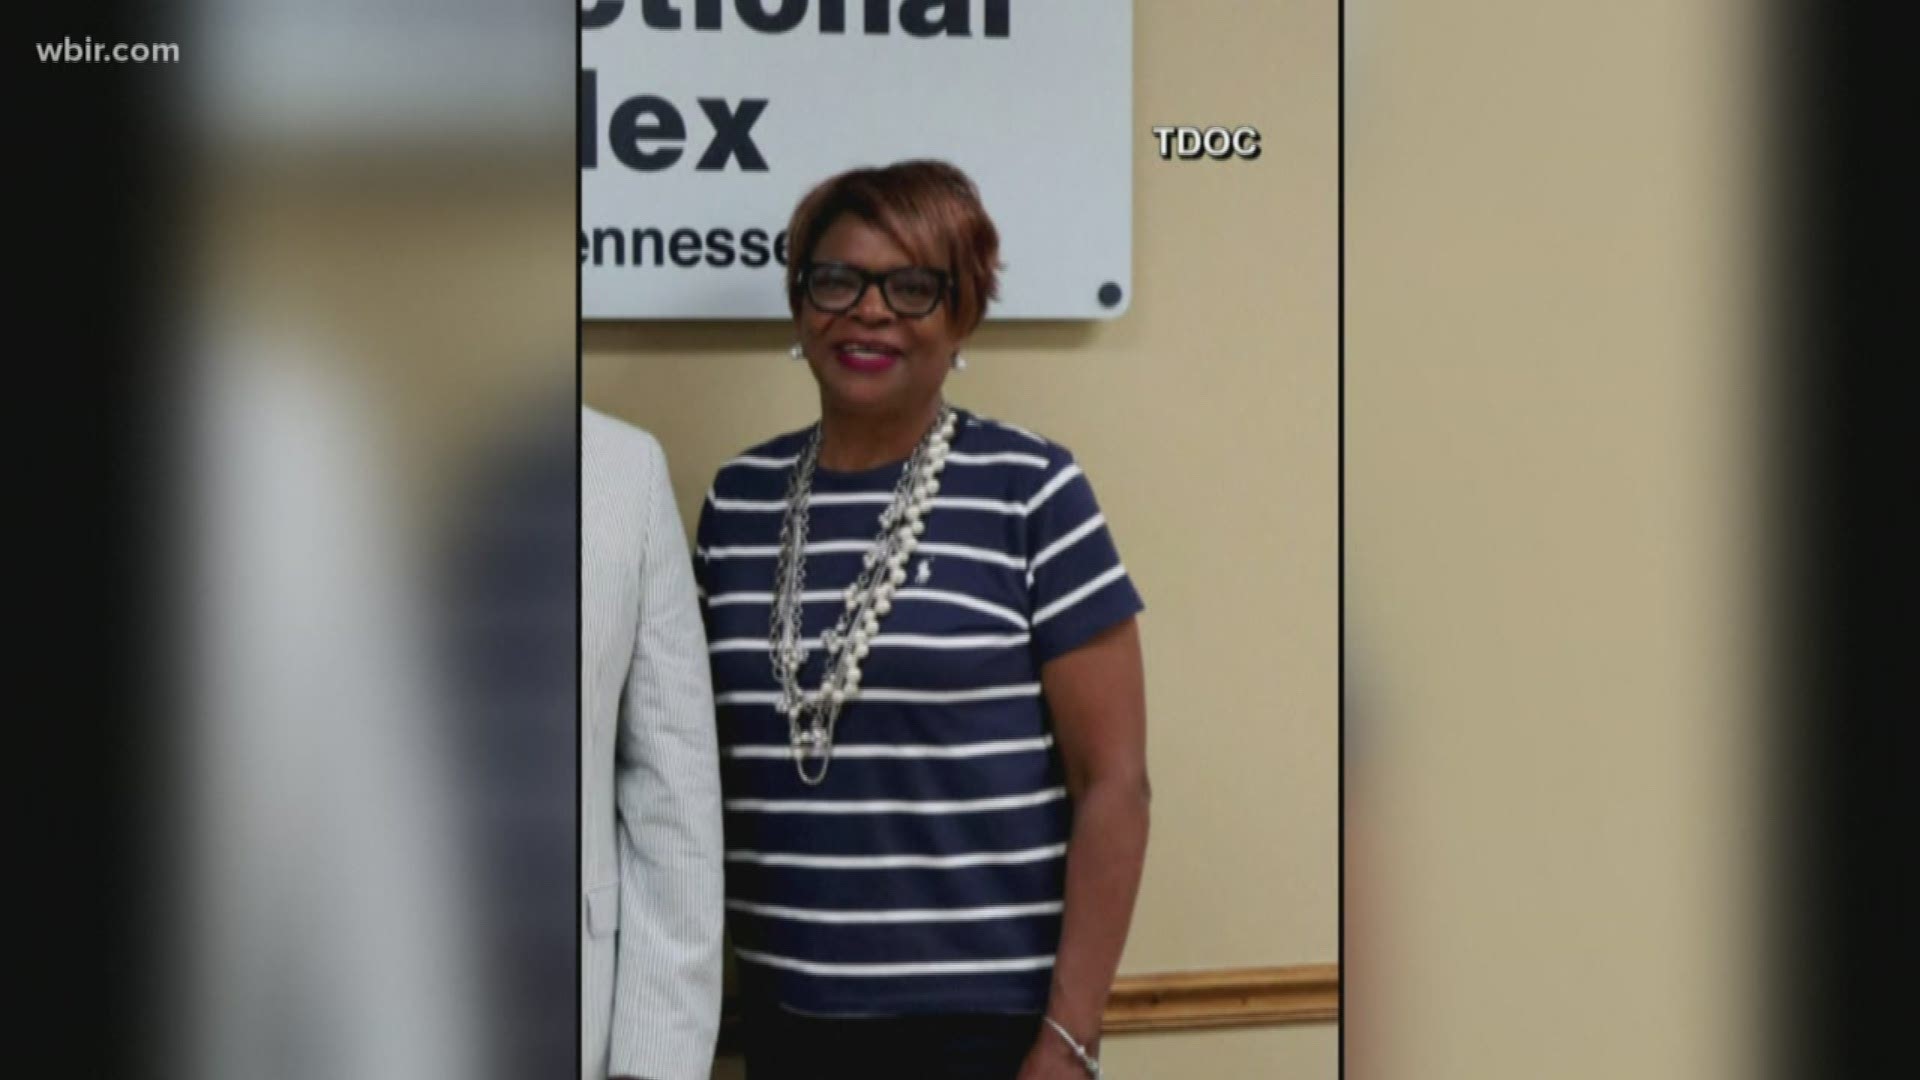 Friday- friends and family will say their goodbyes to Debra Johnson. The Tennessee Corrections administrator was allegedly killed by an escaped inmate last week.